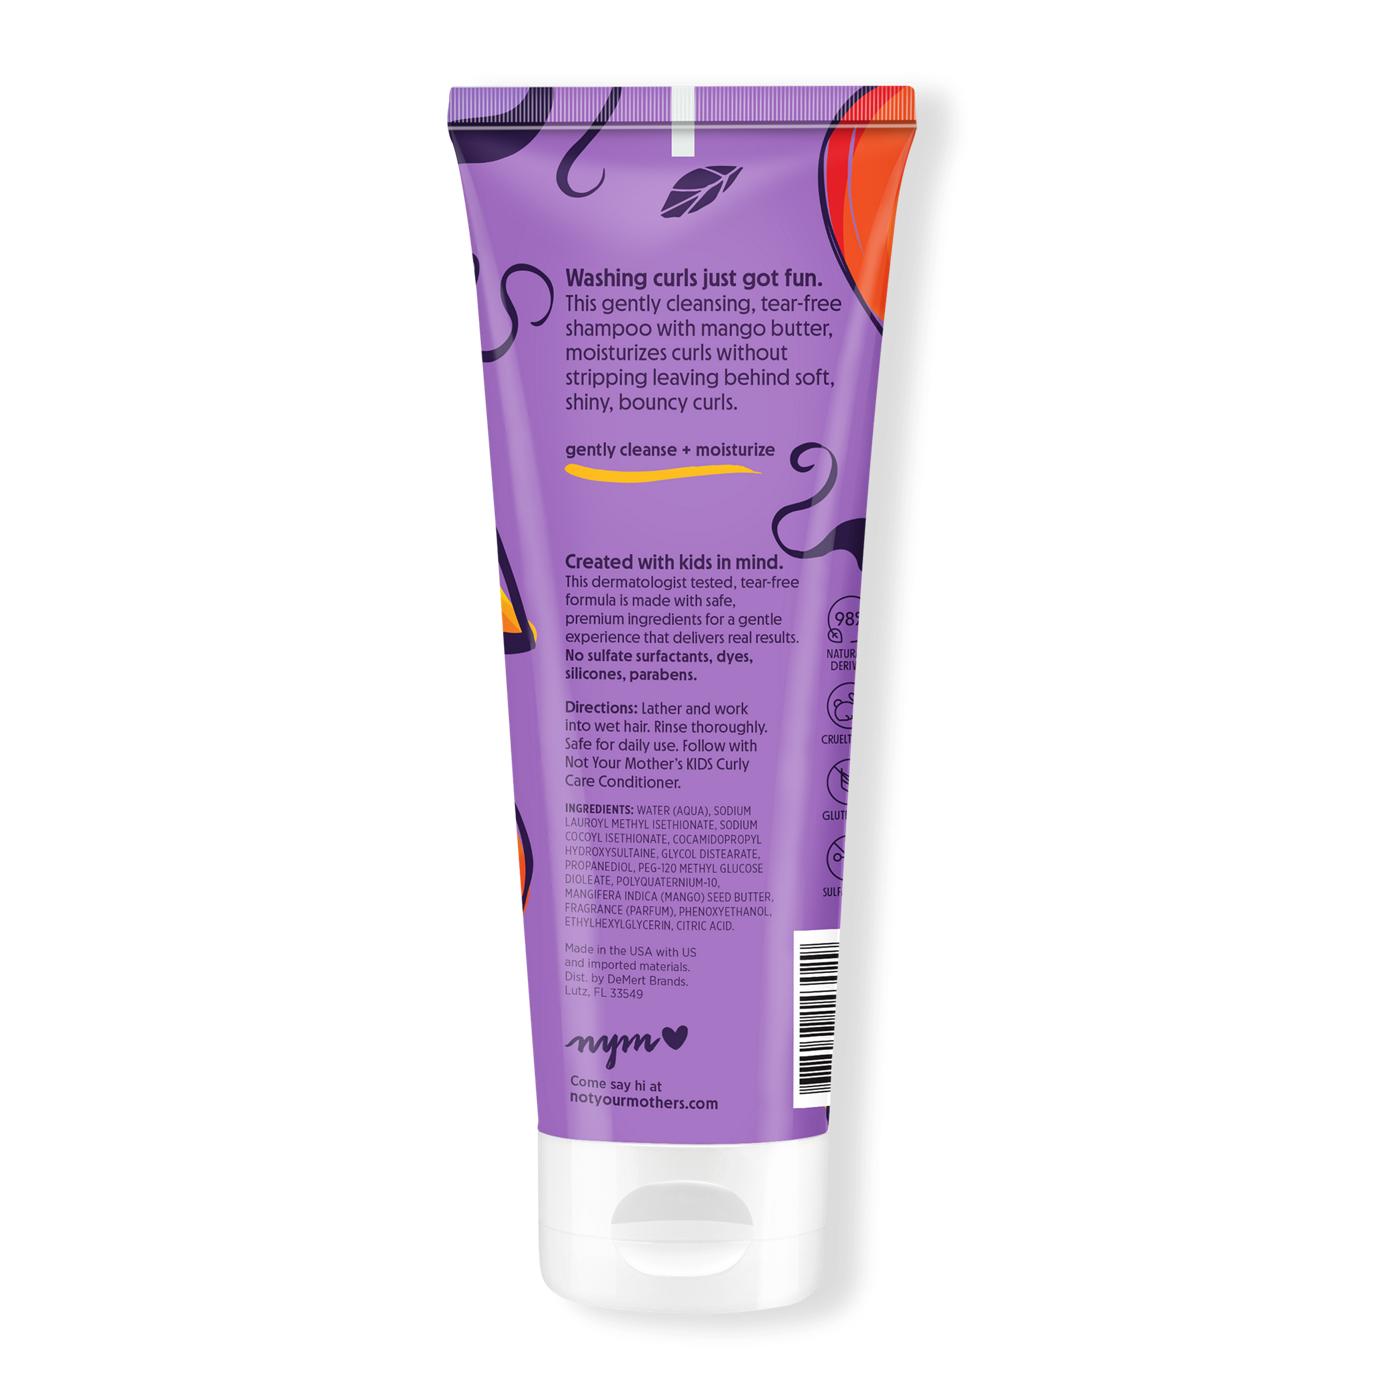 Not Your Mother's Kids Curly Care Moisturizing Shampoo; image 2 of 2